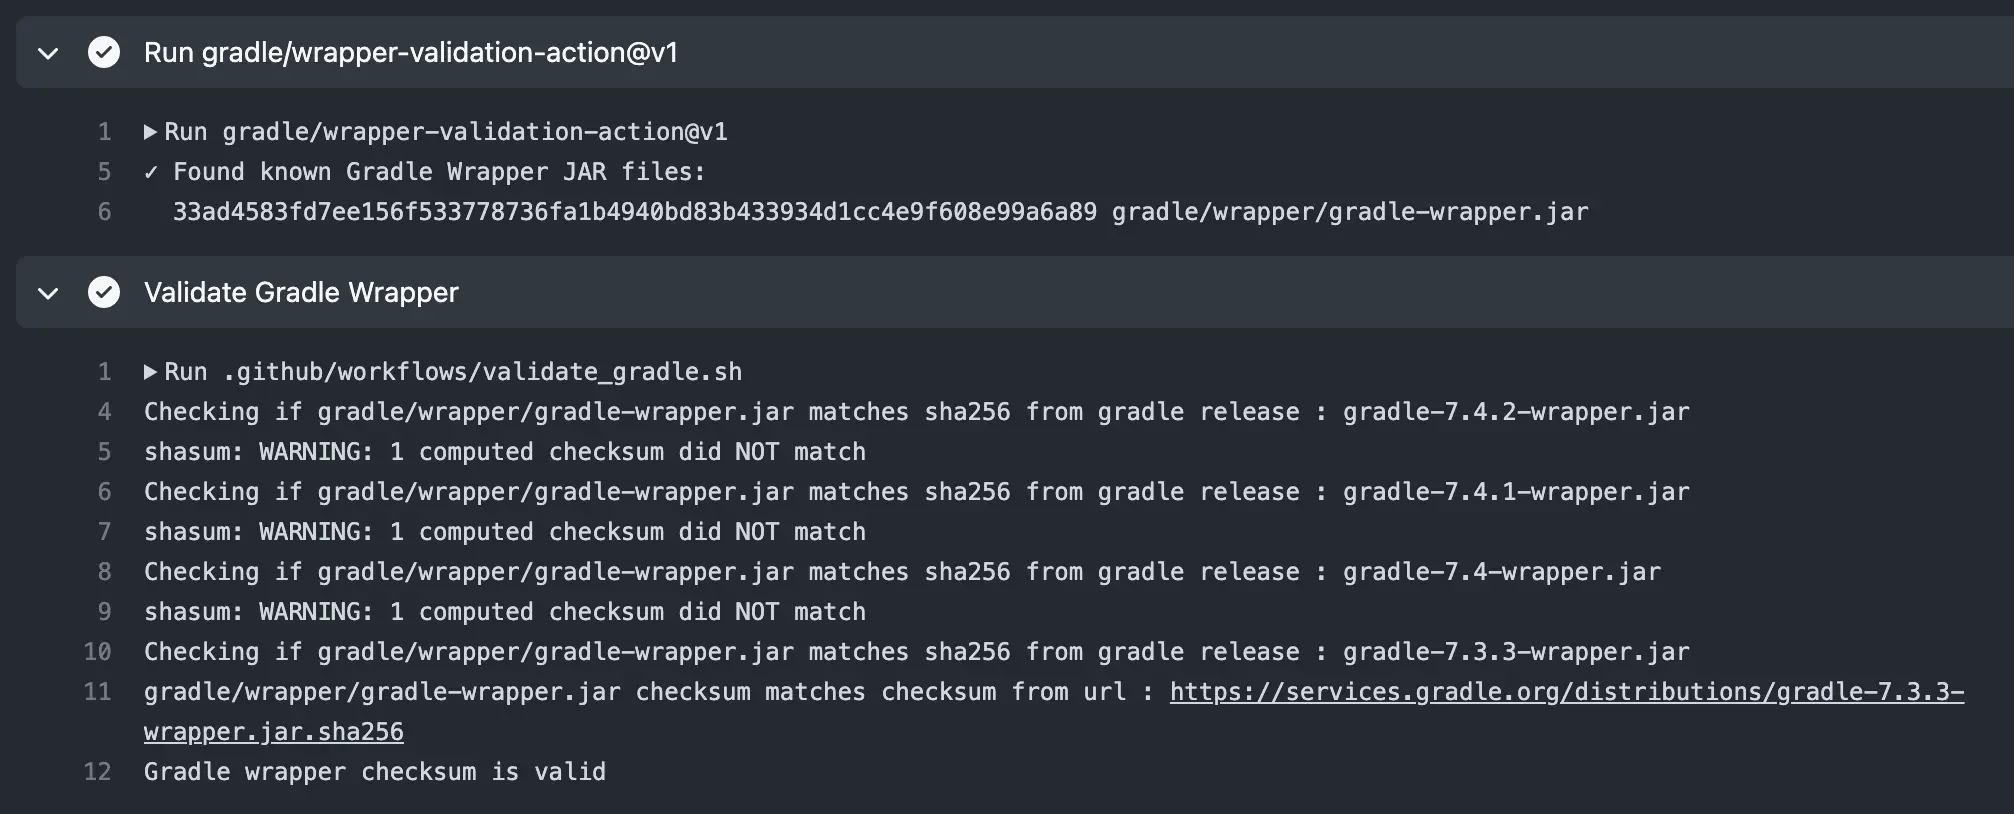 Image showing custom Gradle Wrapper Validation during GitHub Actions execution